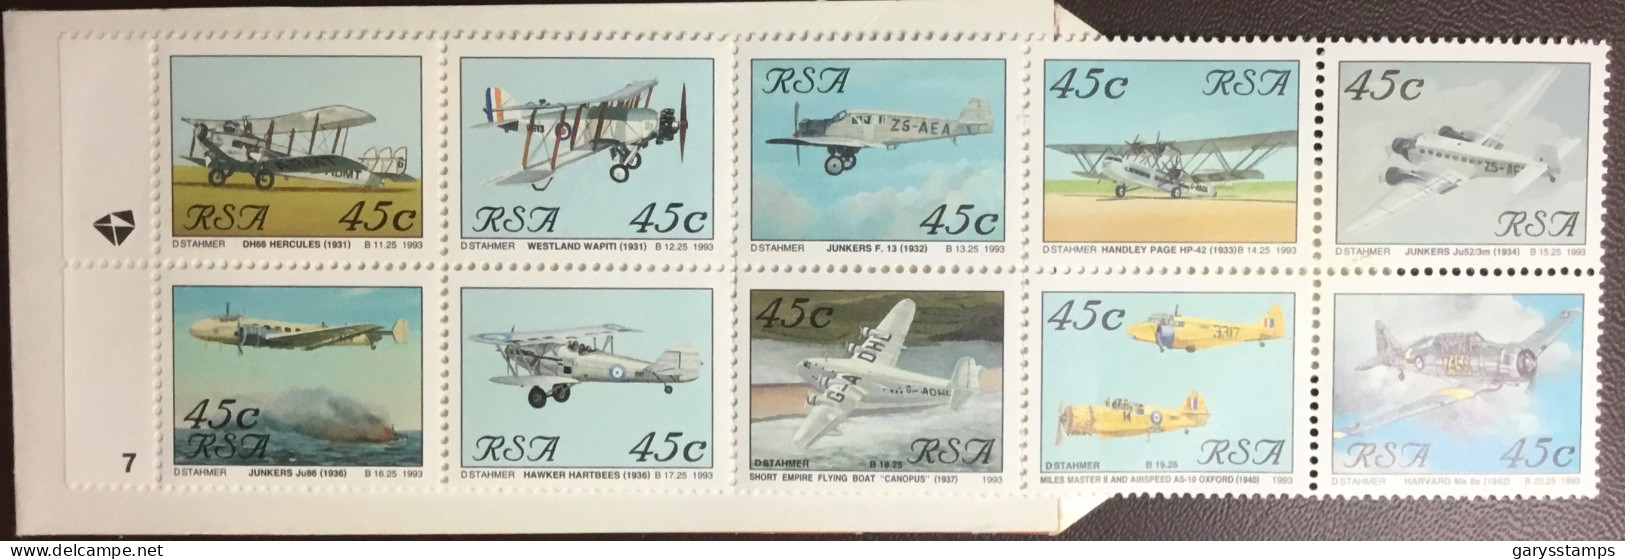 South Africa 1993 Aviation Booklet Pane 7 Booklet Unused - Carnets